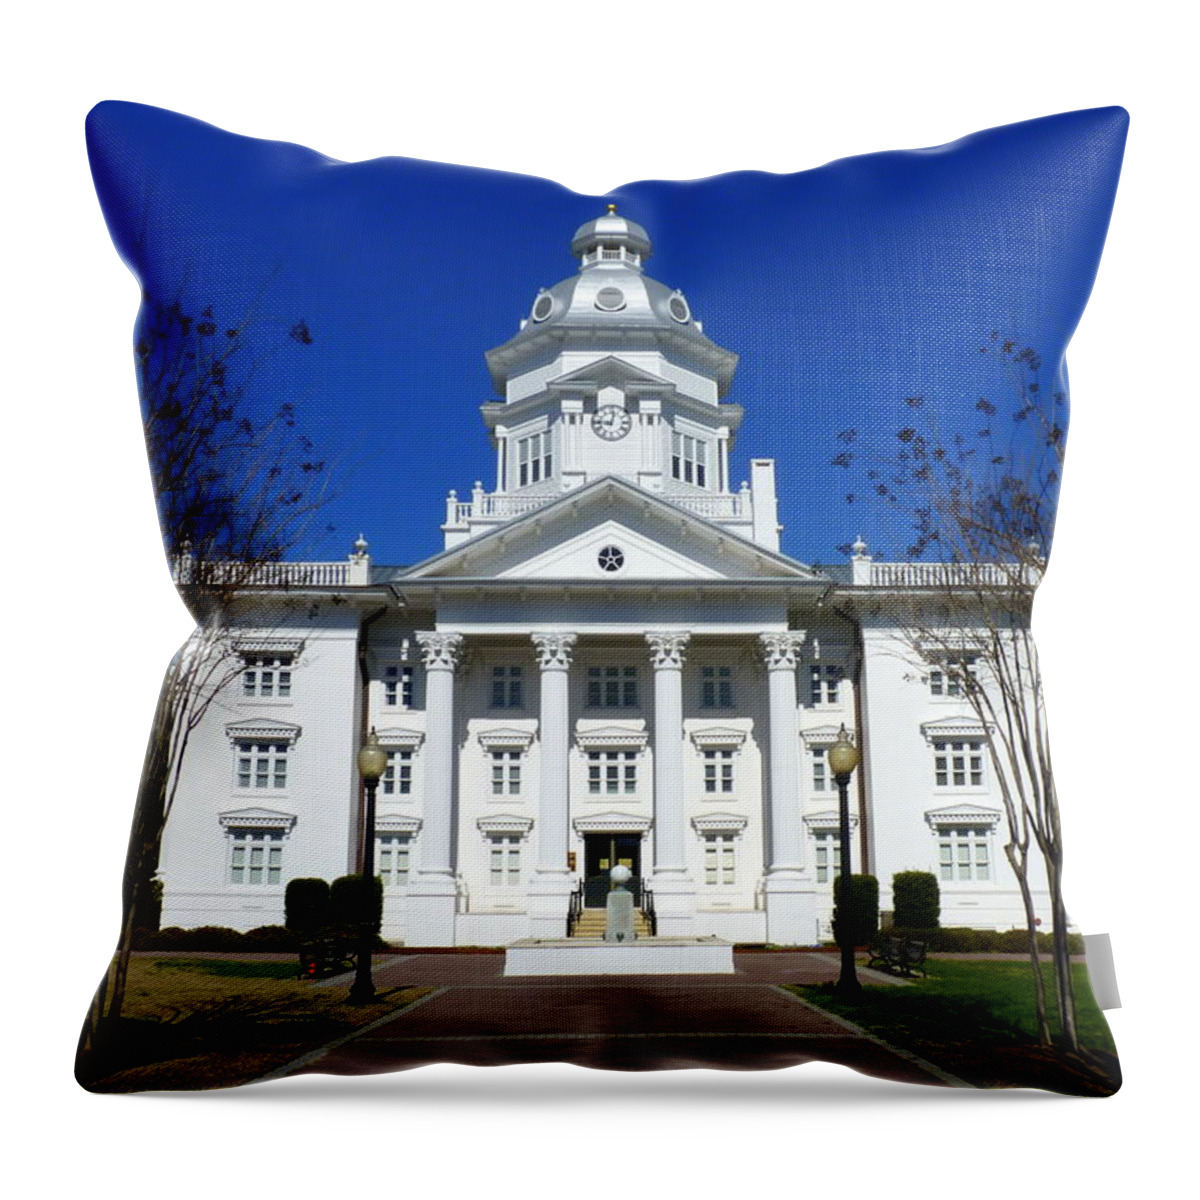 Moultrie Throw Pillow featuring the photograph Moultrie Courthouse by Carla Parris